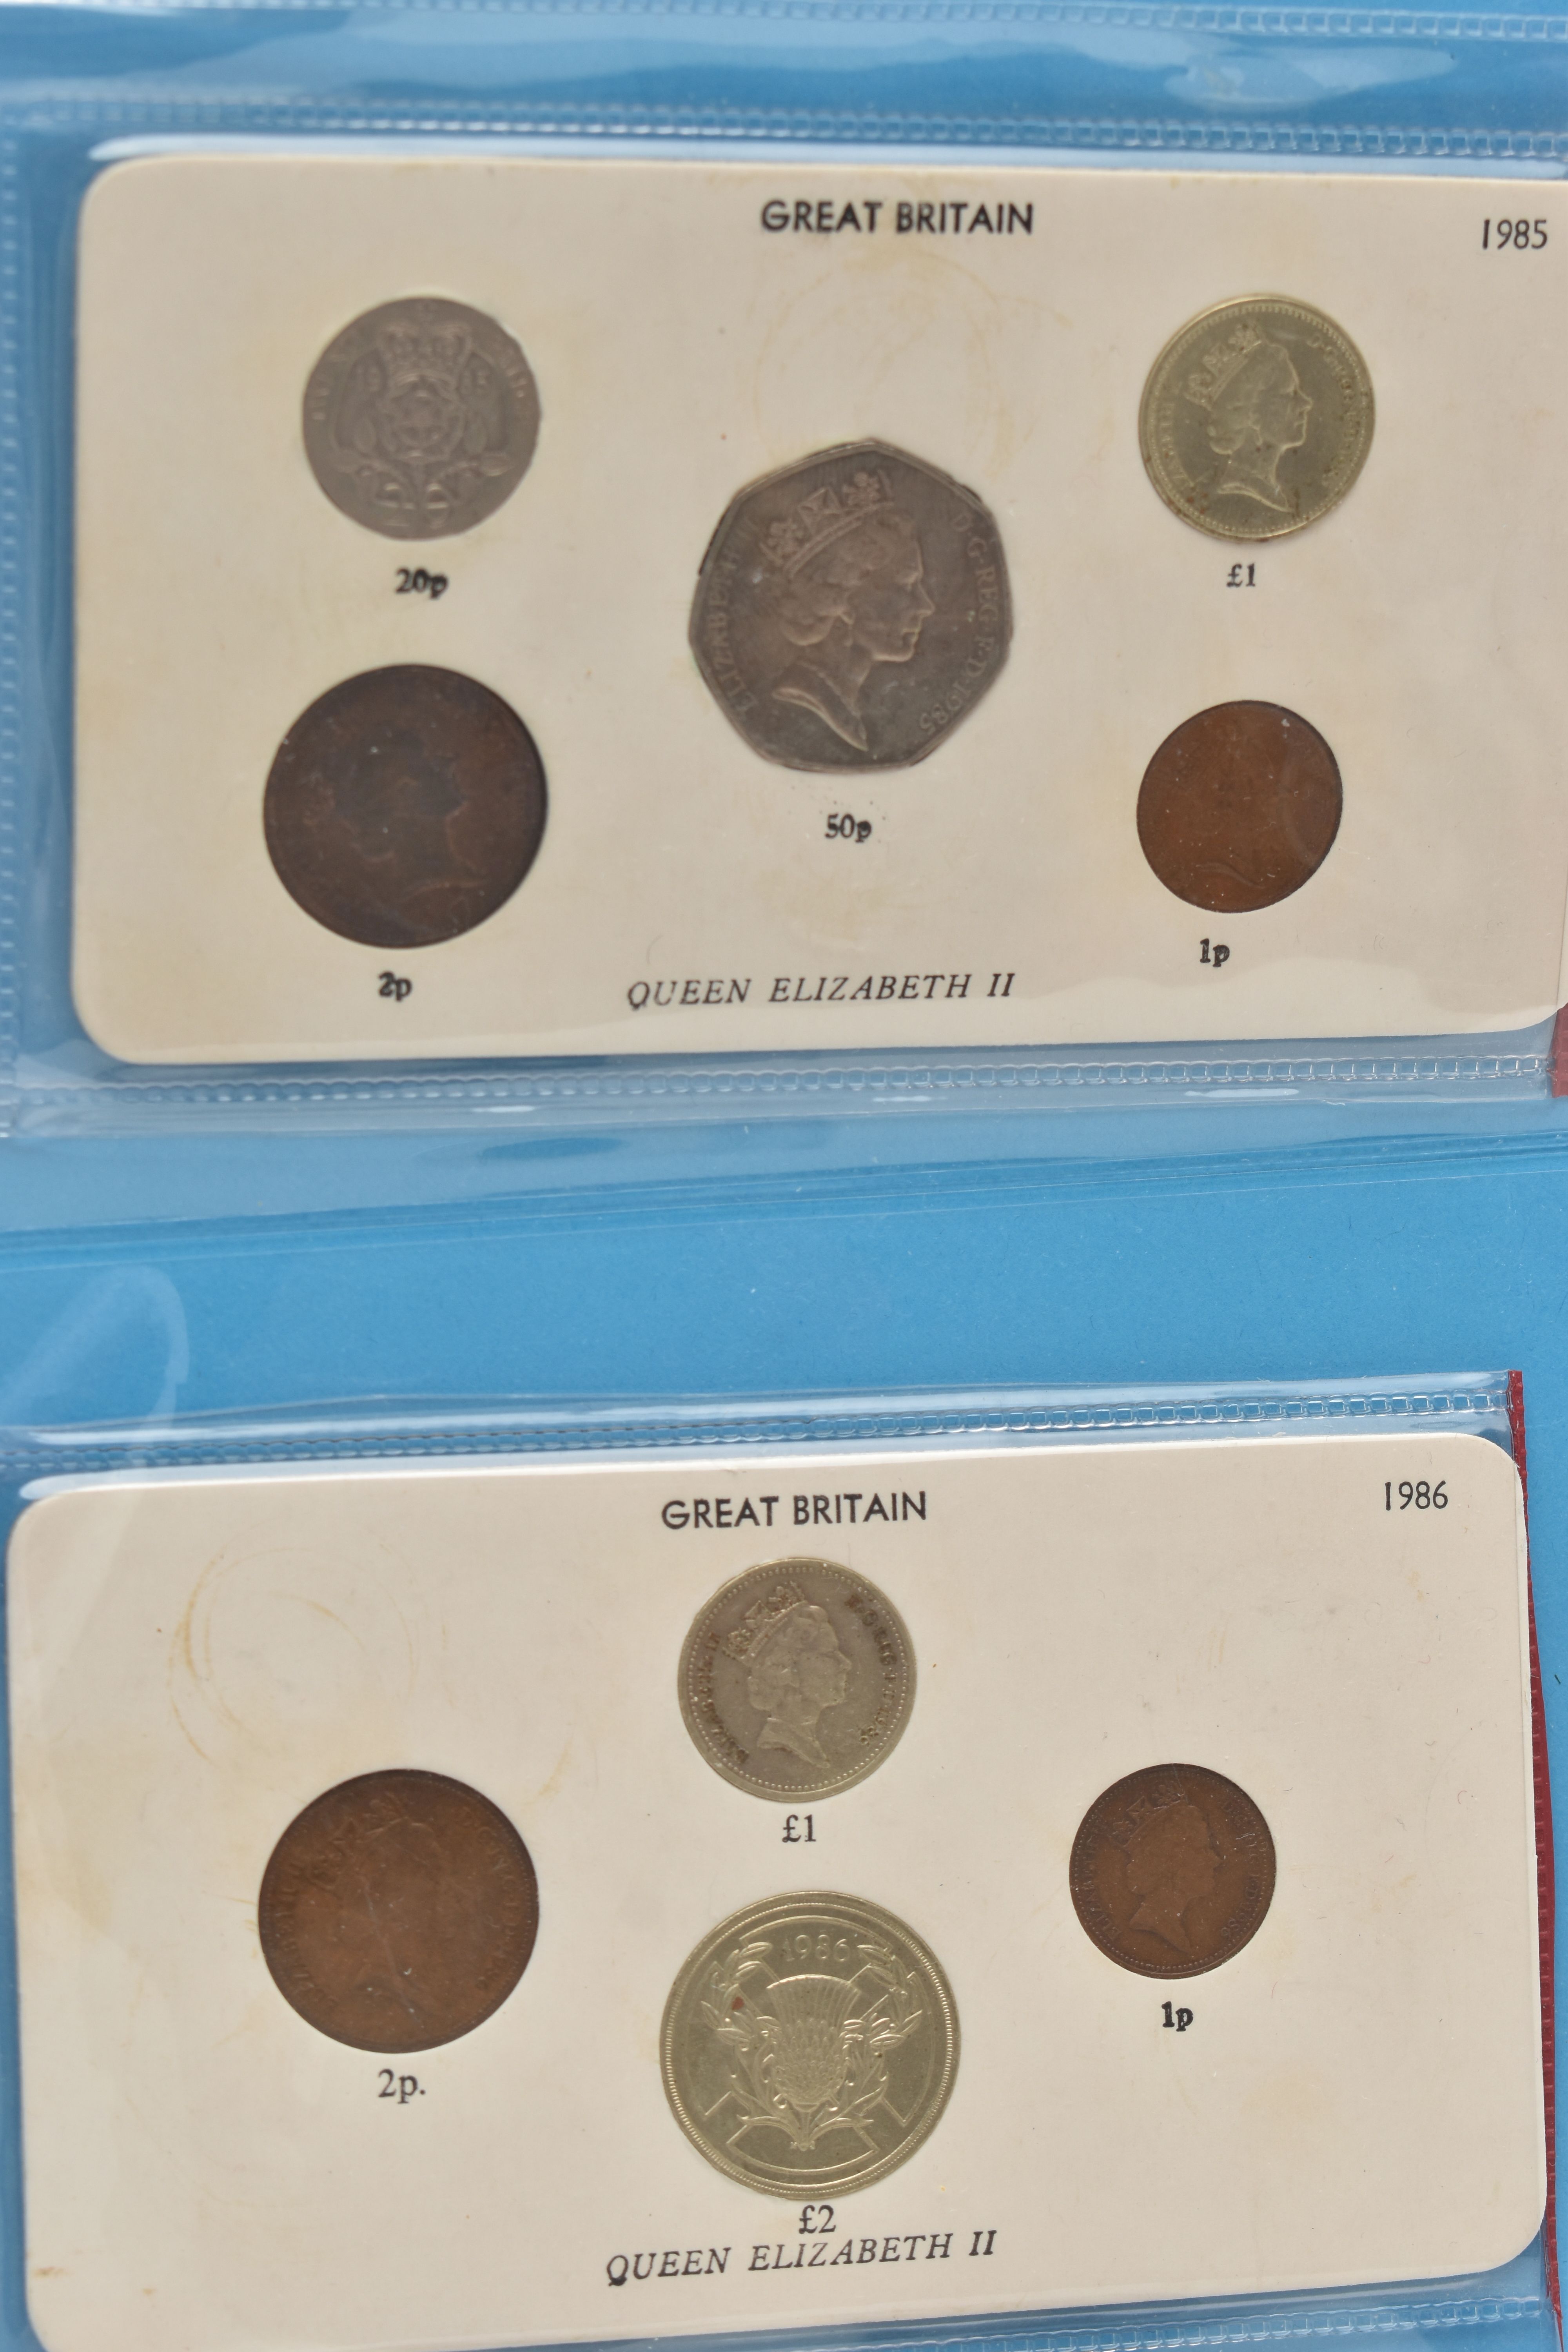 TWO COIN ALBUMS OF UK COINAGE FROM 1974-2018, to include Two Pound coins, Fifty Pence coins, with - Image 2 of 8